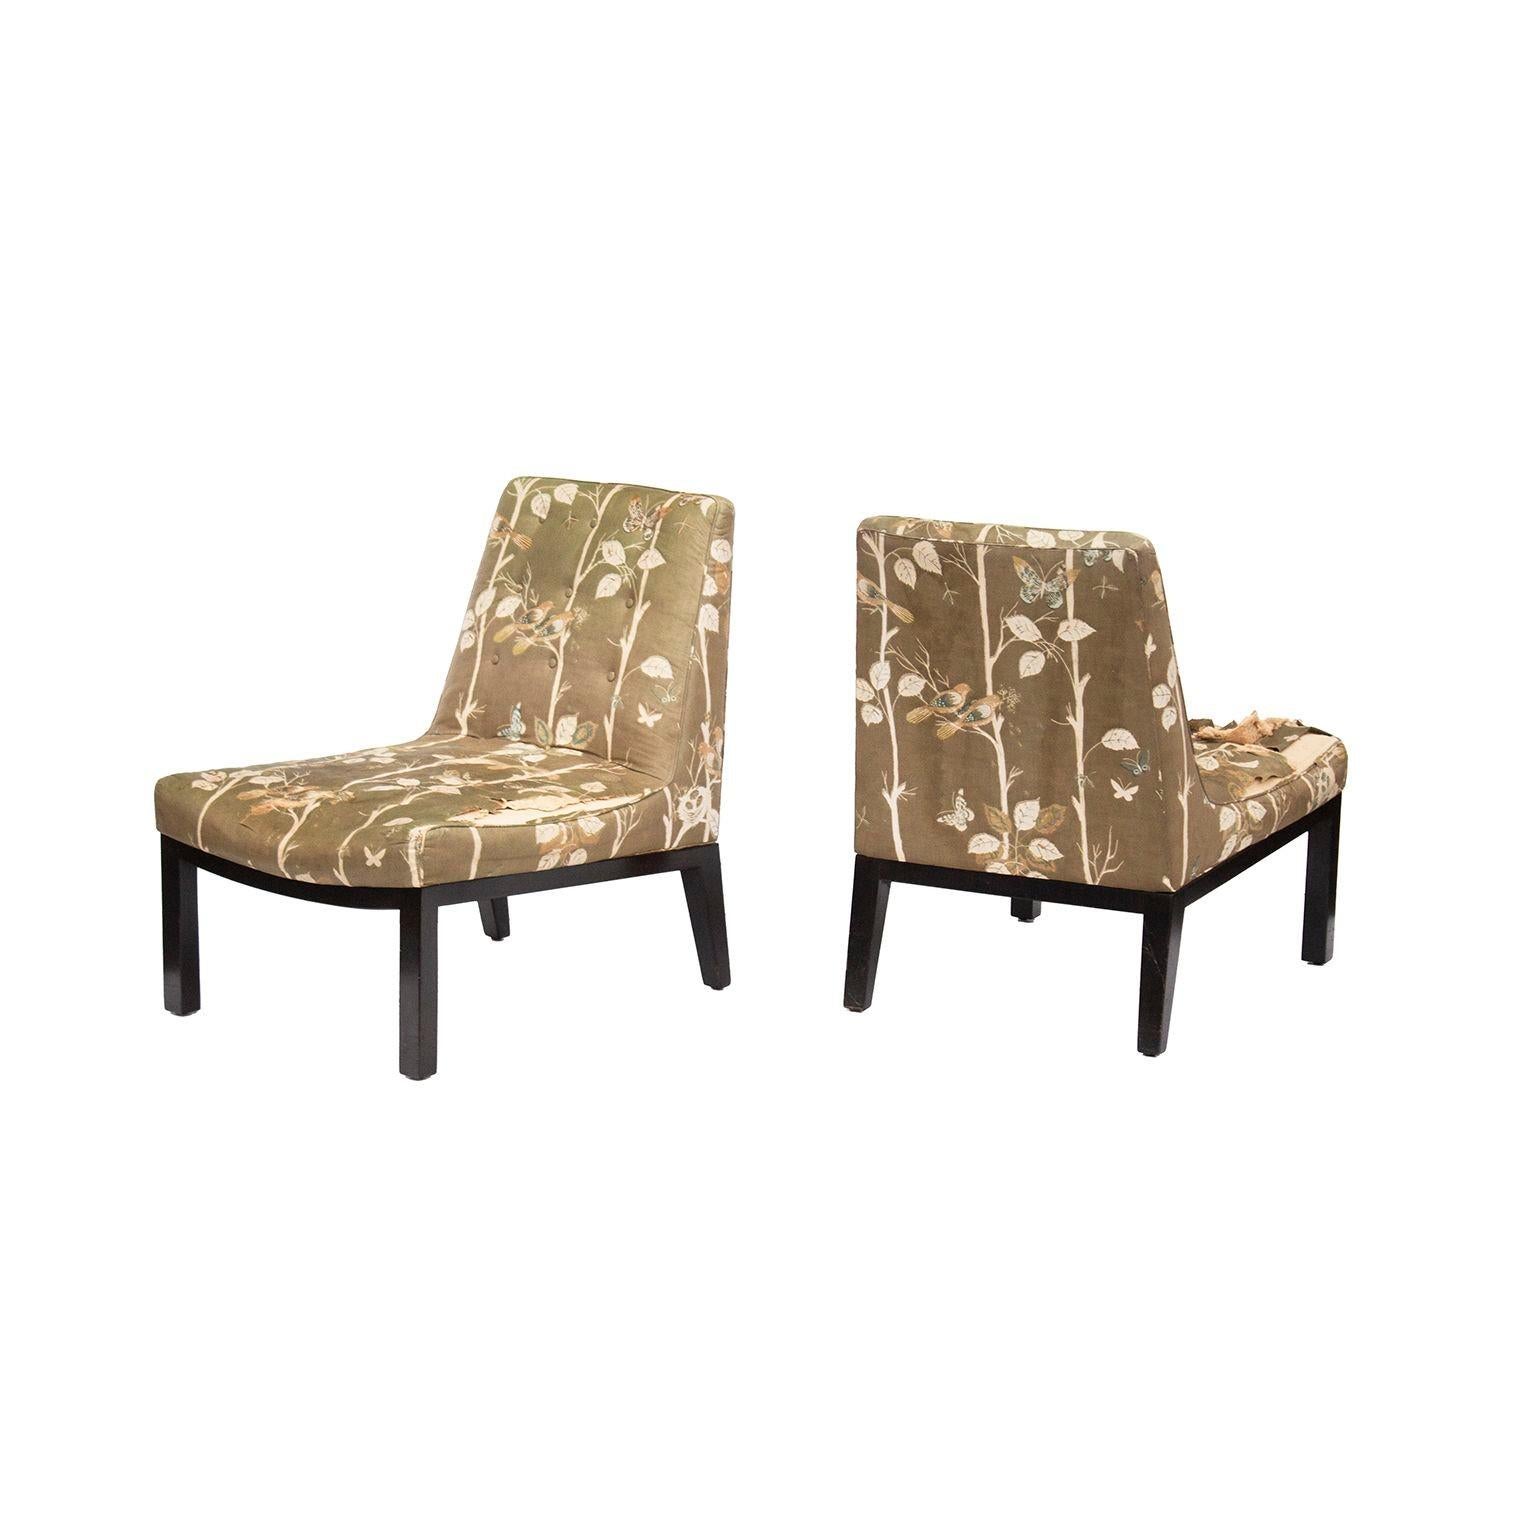 USA, 1950s
Pair of slipper chairs by Edward Wormley for Dunbar. Beautiful details on this design with curving front frame and deep and dimensional hardwood frames. Both are signed with metal Dunbar placard on the underside. In original upholstery,